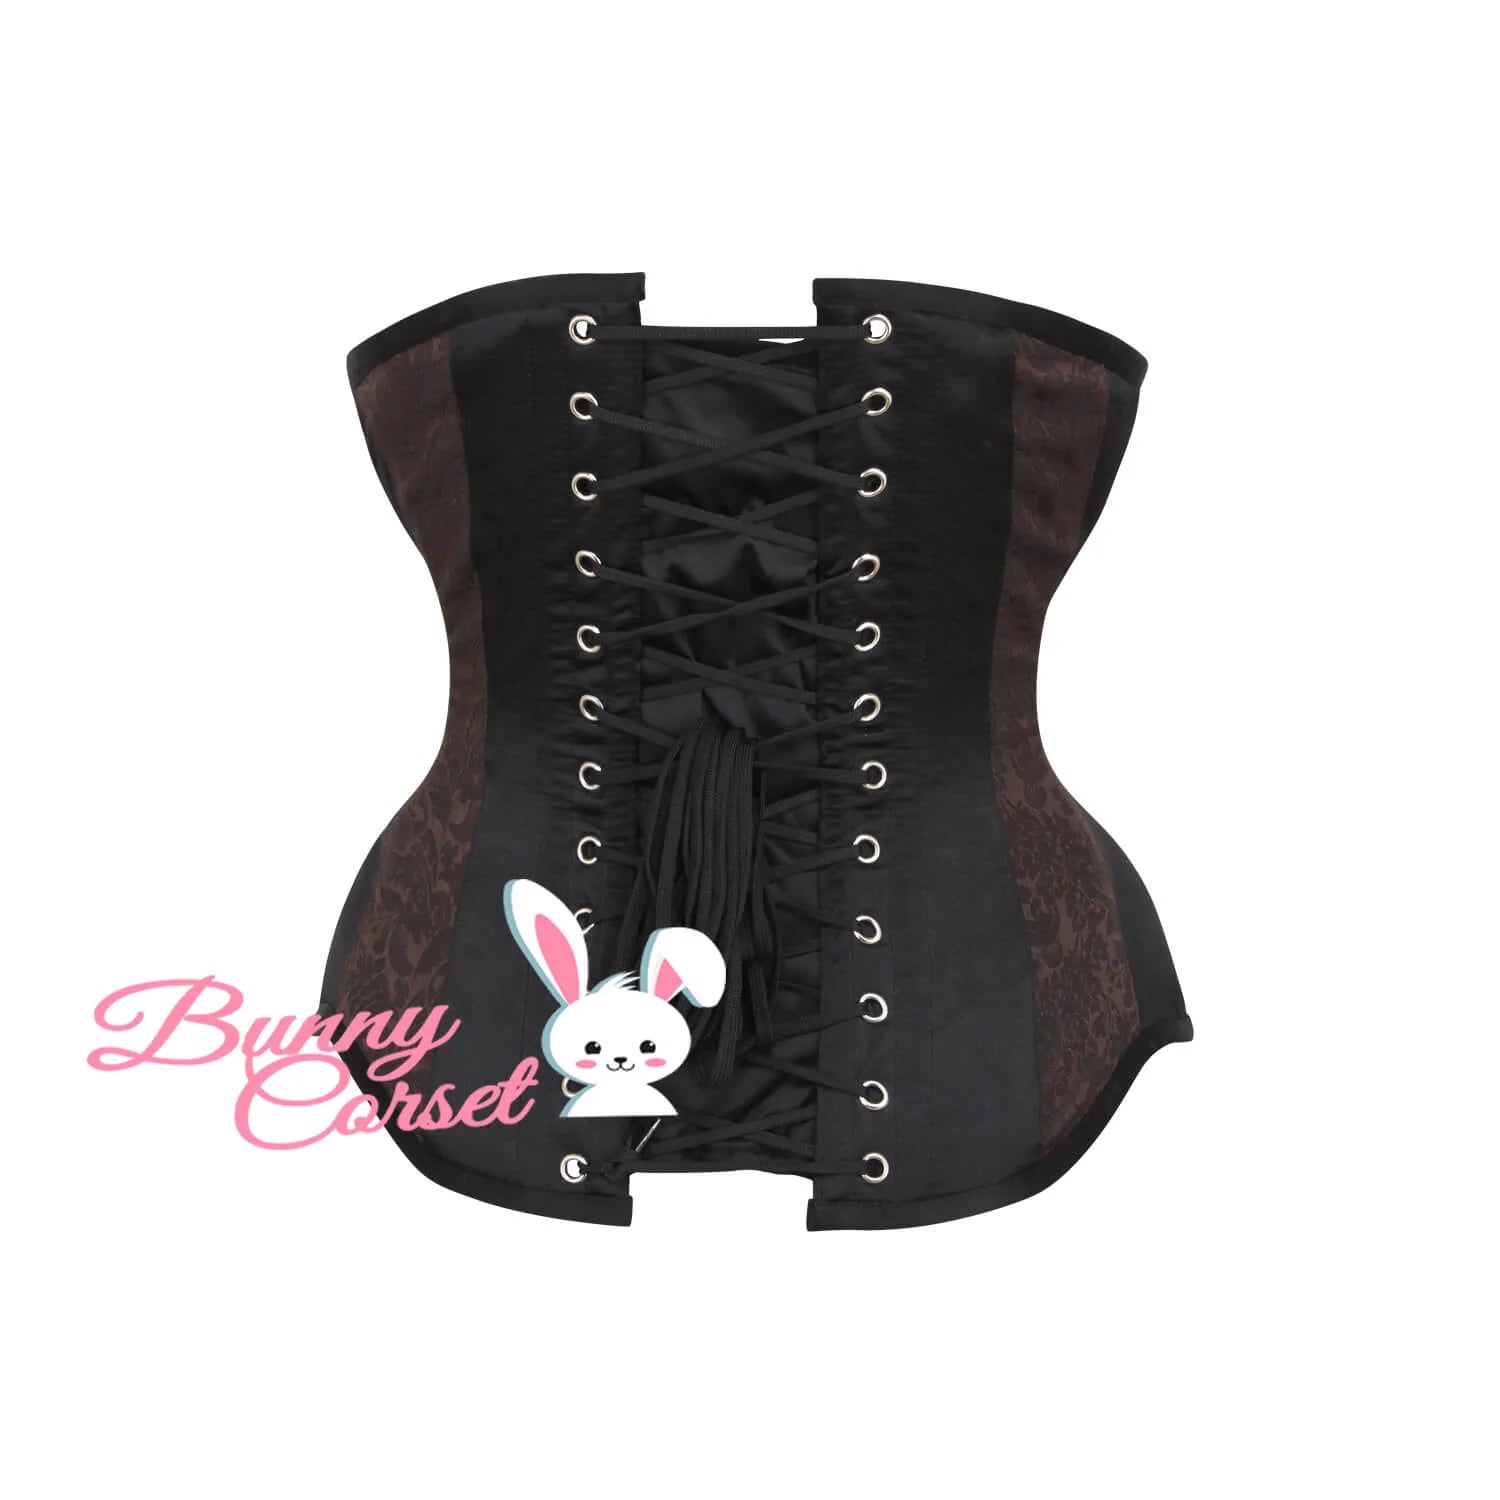 Steampunk Underbust Corset with Butterfly Shrug - V2